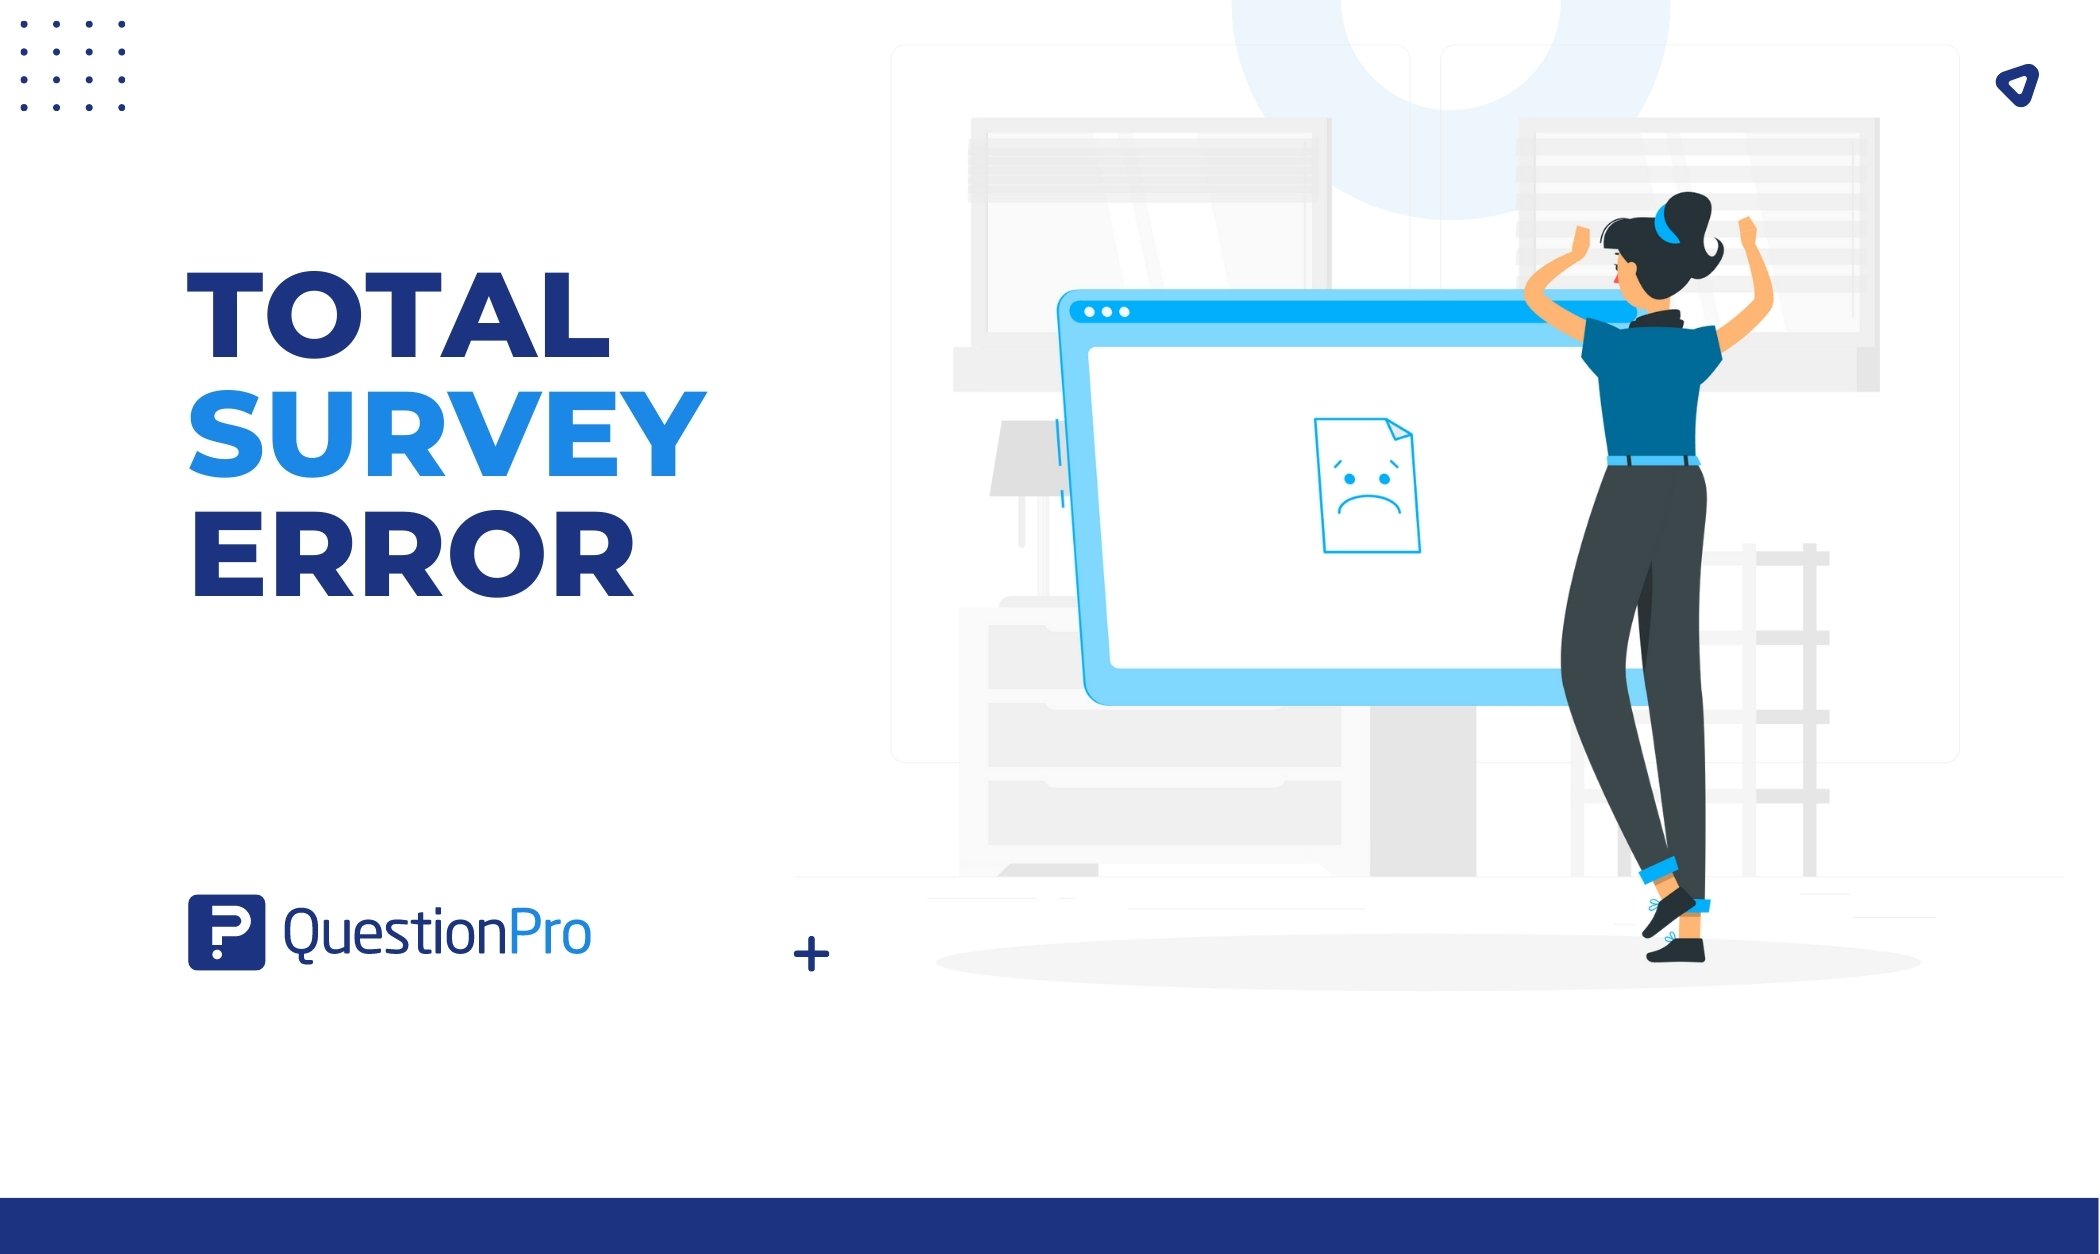 Total survey error is the total of all errors that could be present in a survey and impact its accuracy and dependability. Learn more.